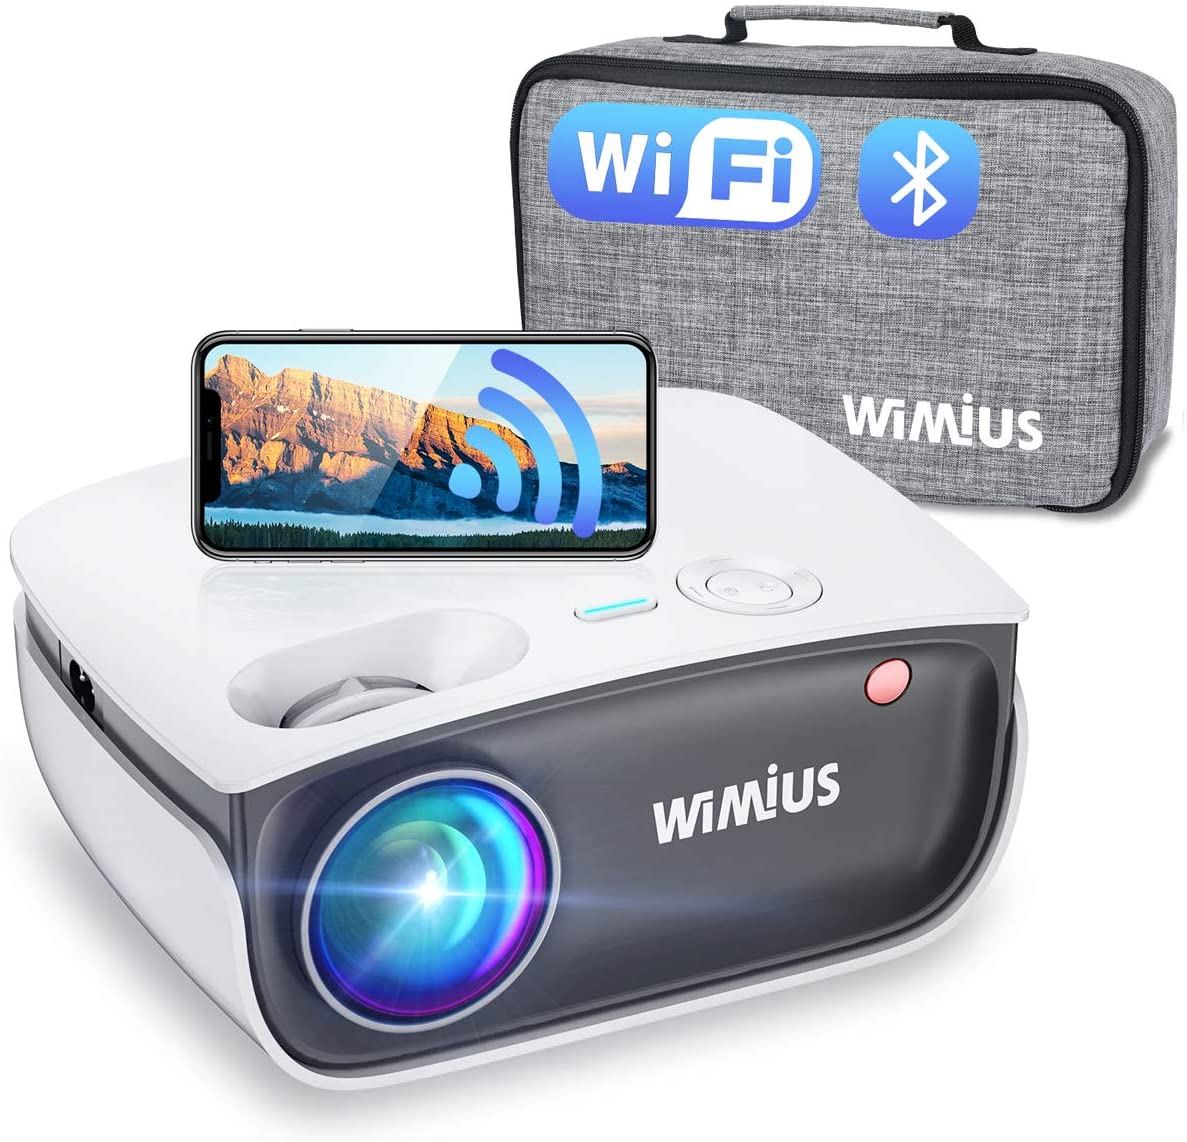 Wifi Bluetooth Projector Support 1080P Full HD Enhanced, 20%+ Brightness, WiMiUS S25 Mini Portable Outdoor Movie Projector w/ Wireless Mirroring & Airplay & Zoom 50%, for Fire TV Stick, HDMI, PC, PS4